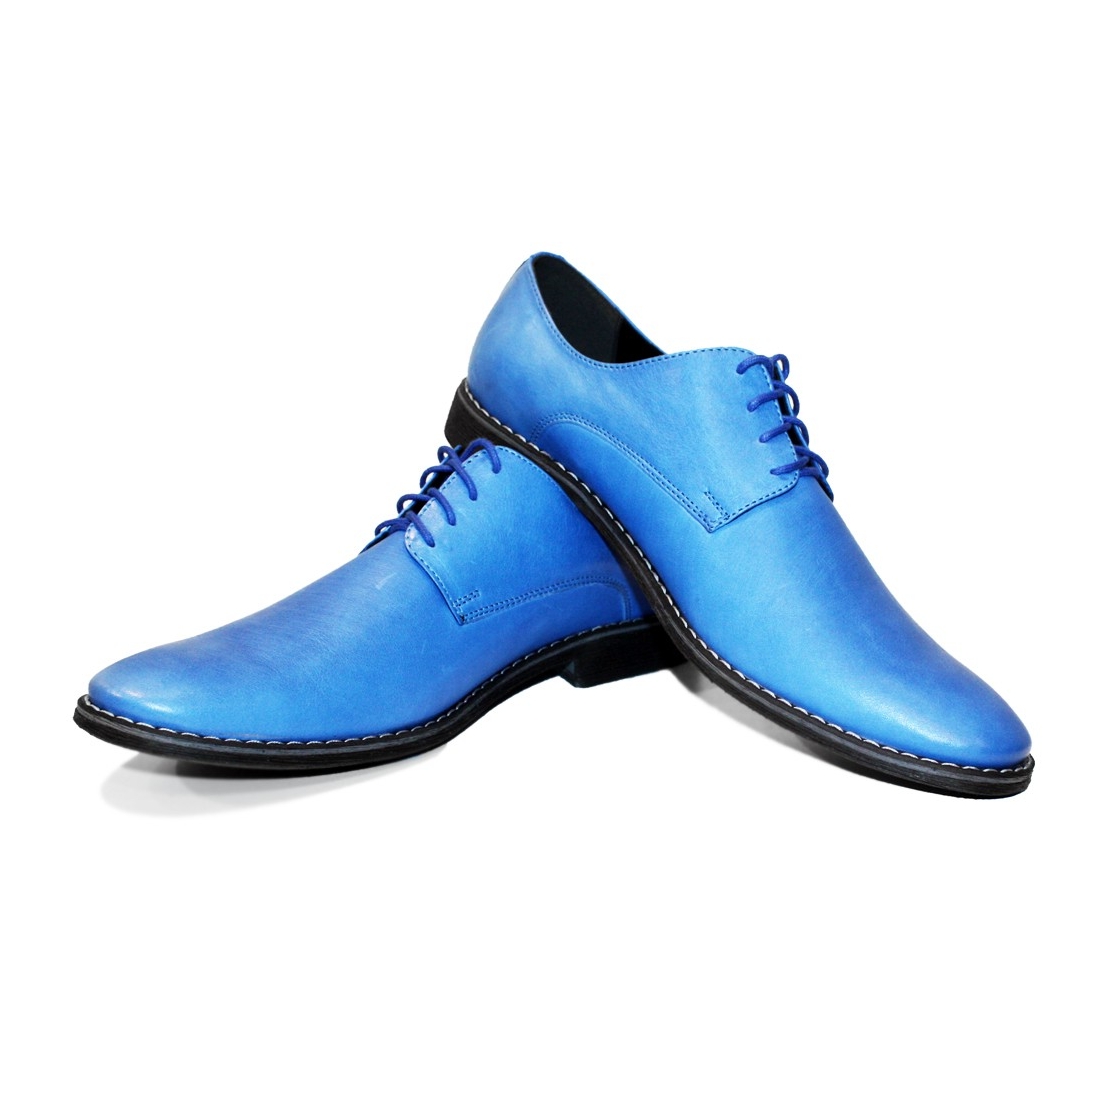 Modello Lunto - Blue Lace-Up Oxfords Dress Shoes - Cowhide Smooth Leather